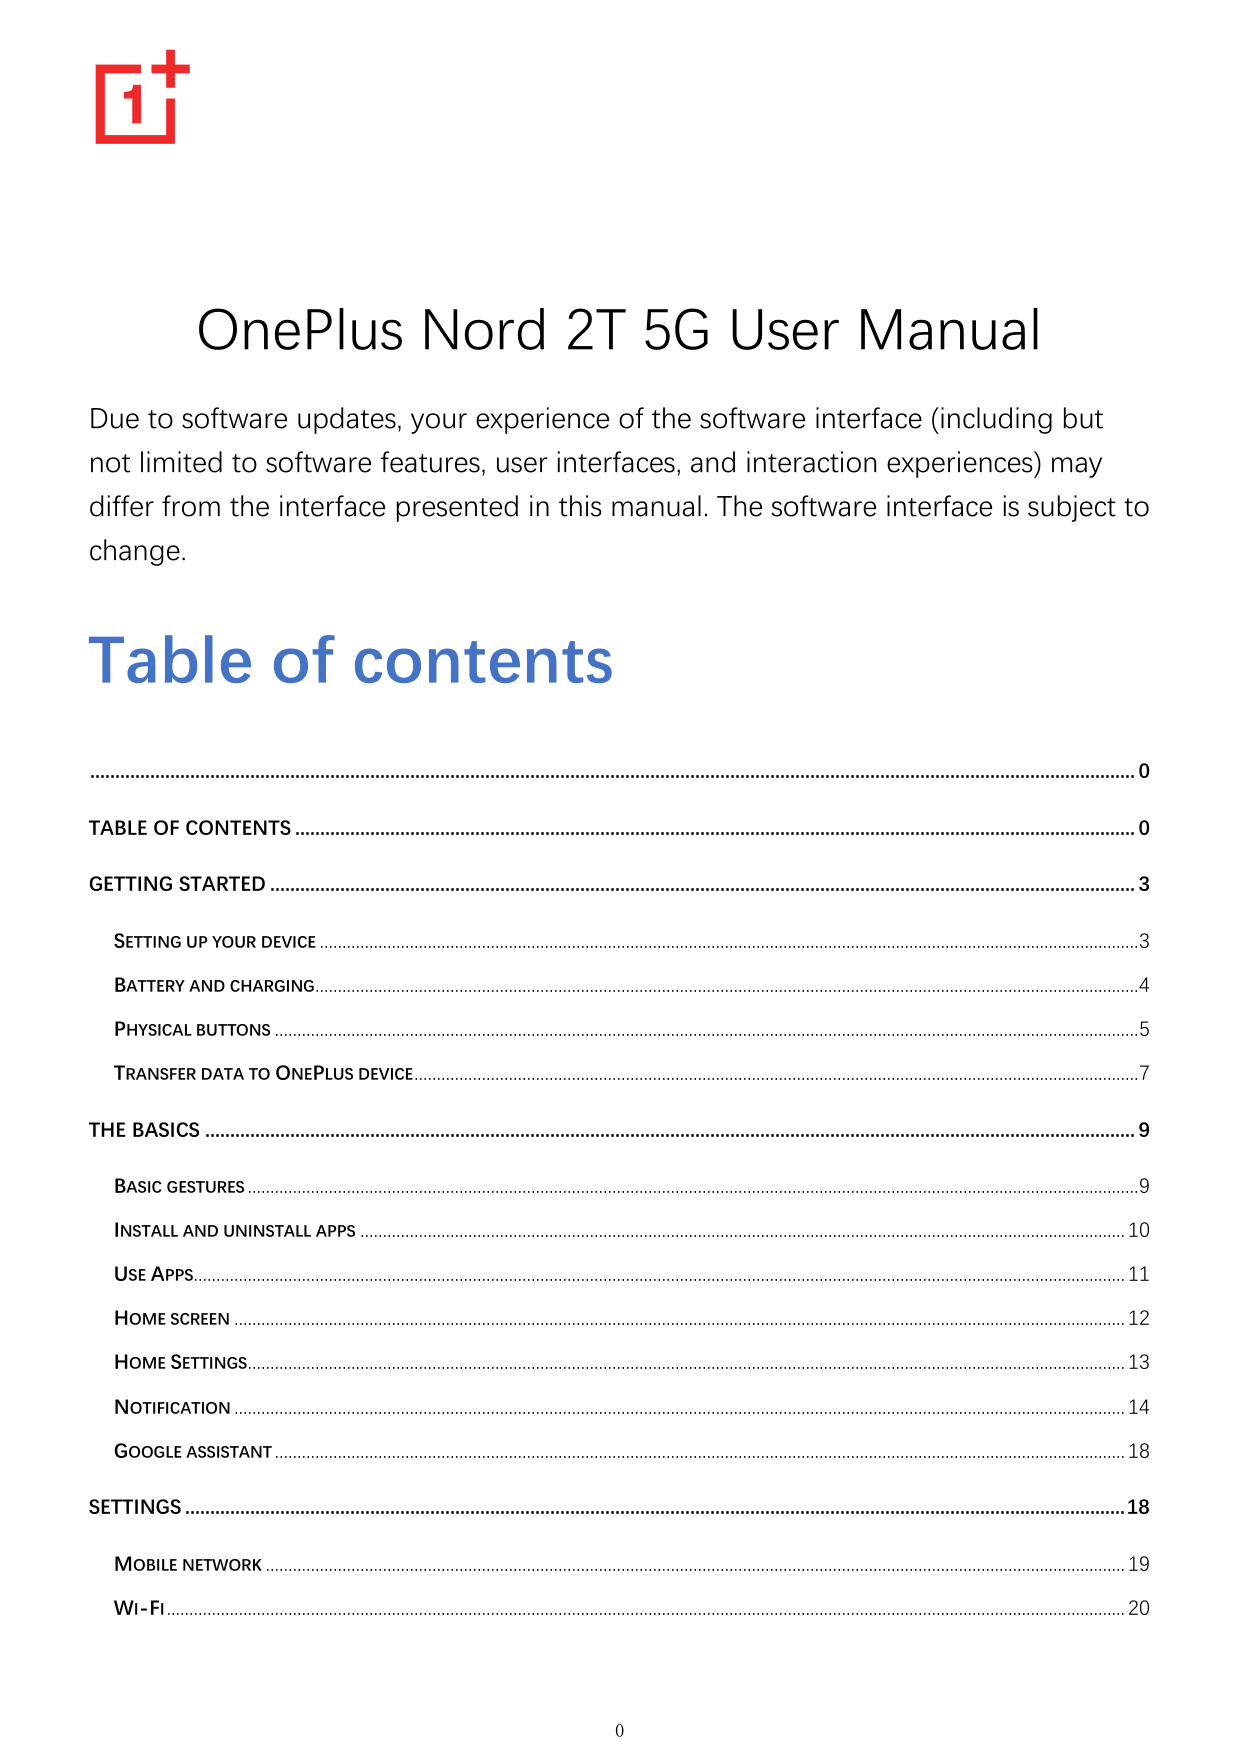 OnePlus Nord 2T 5G User ManualDue to software updates, your experience of the software interface (including butnot limited to so